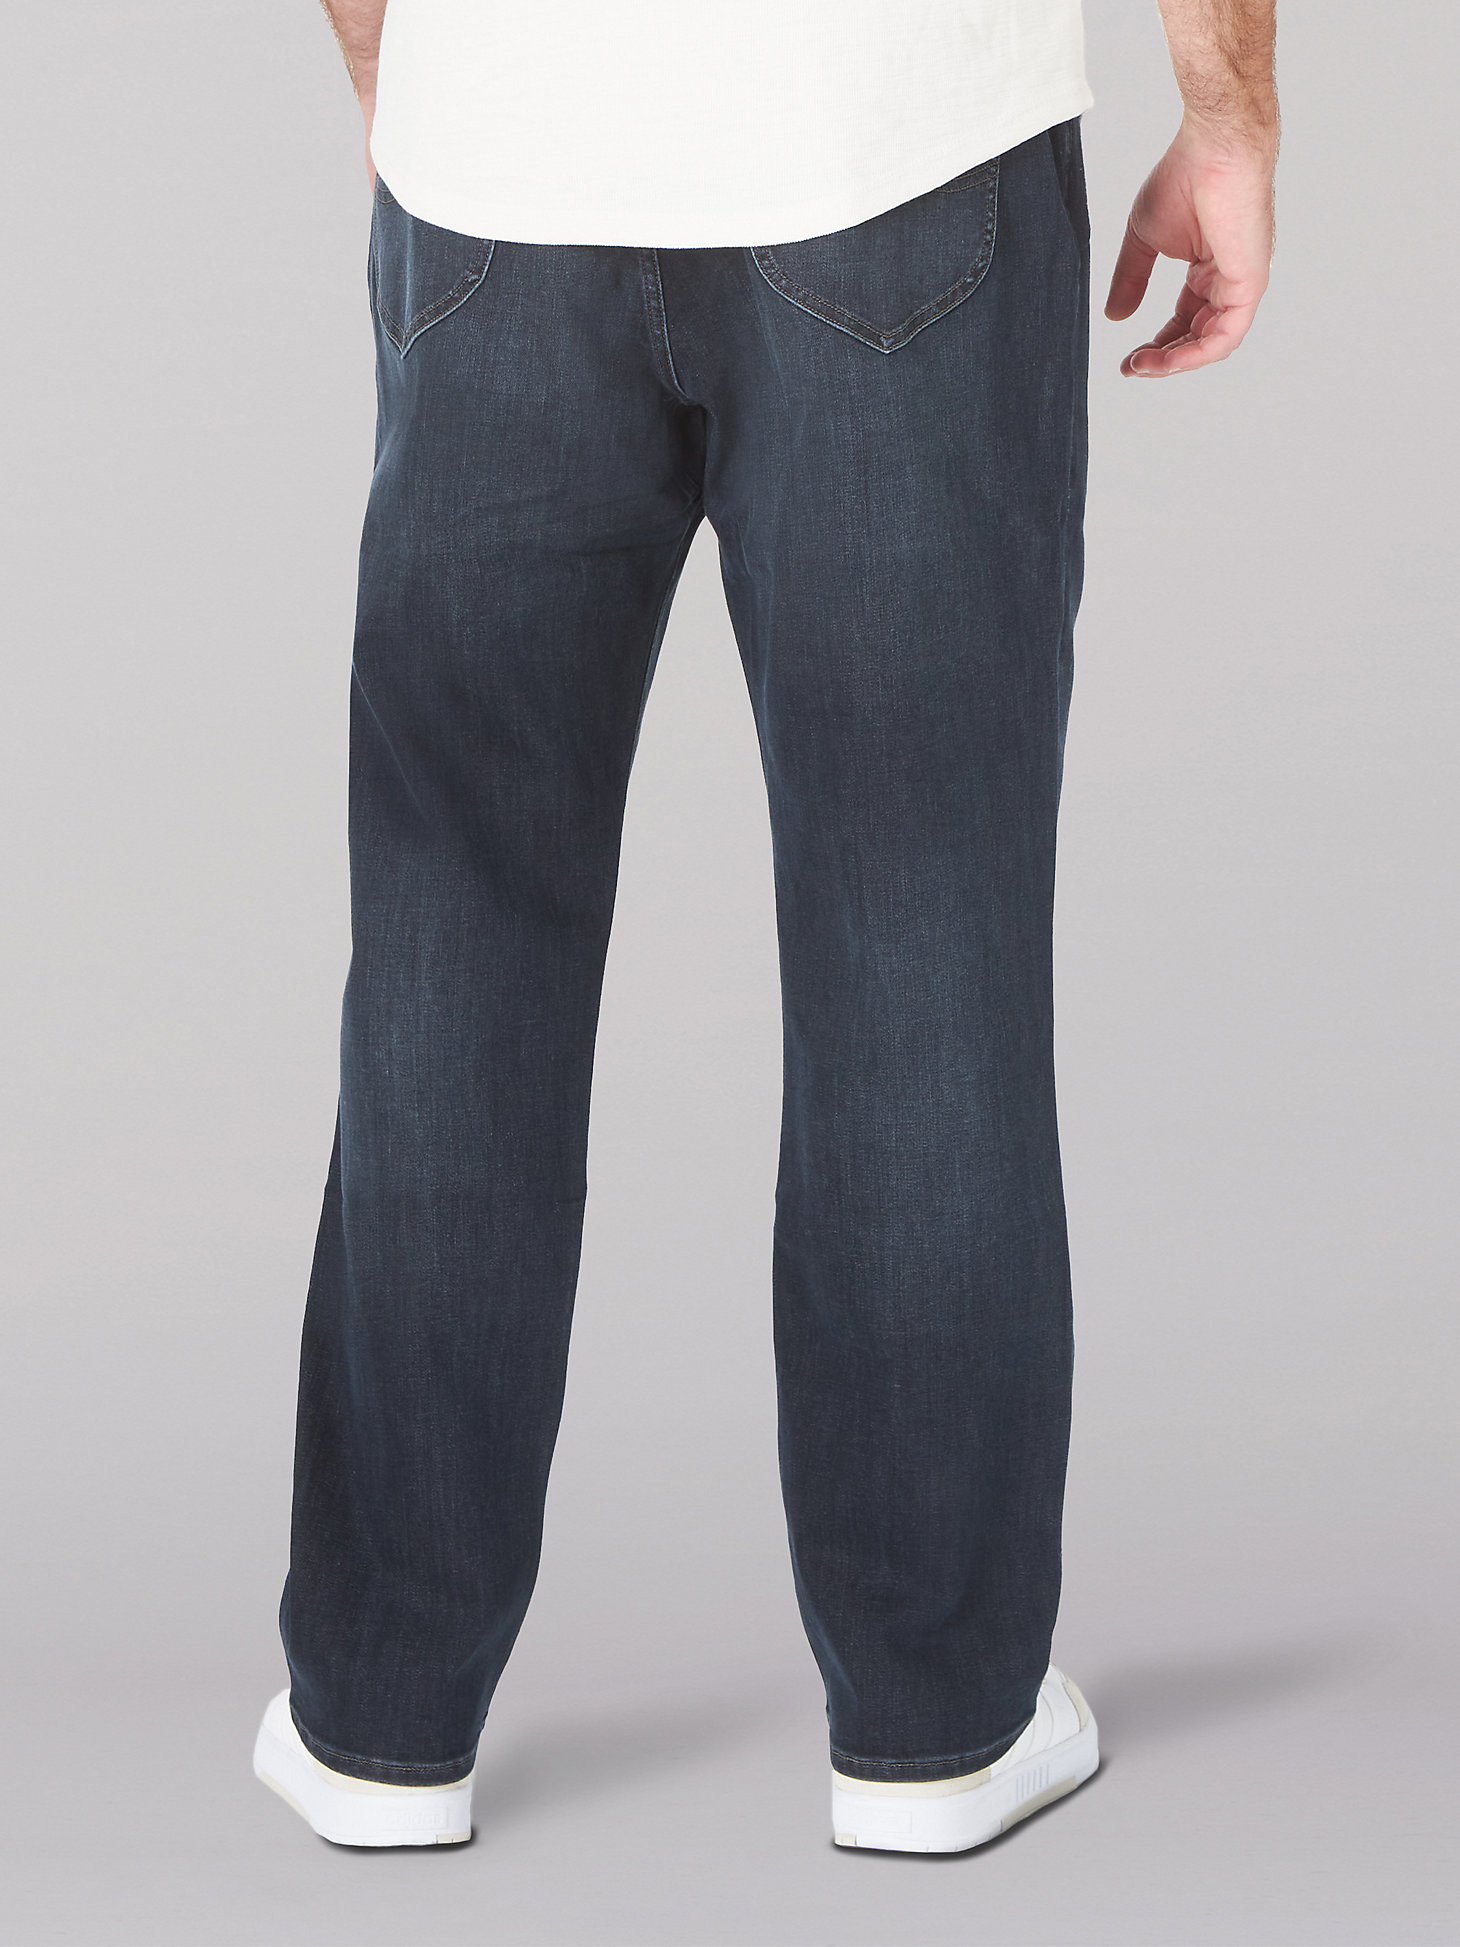 Men's Extreme Motion MVP Straight Fit Tapered Jean (Big & Tall) in Sebastian alternative view 1